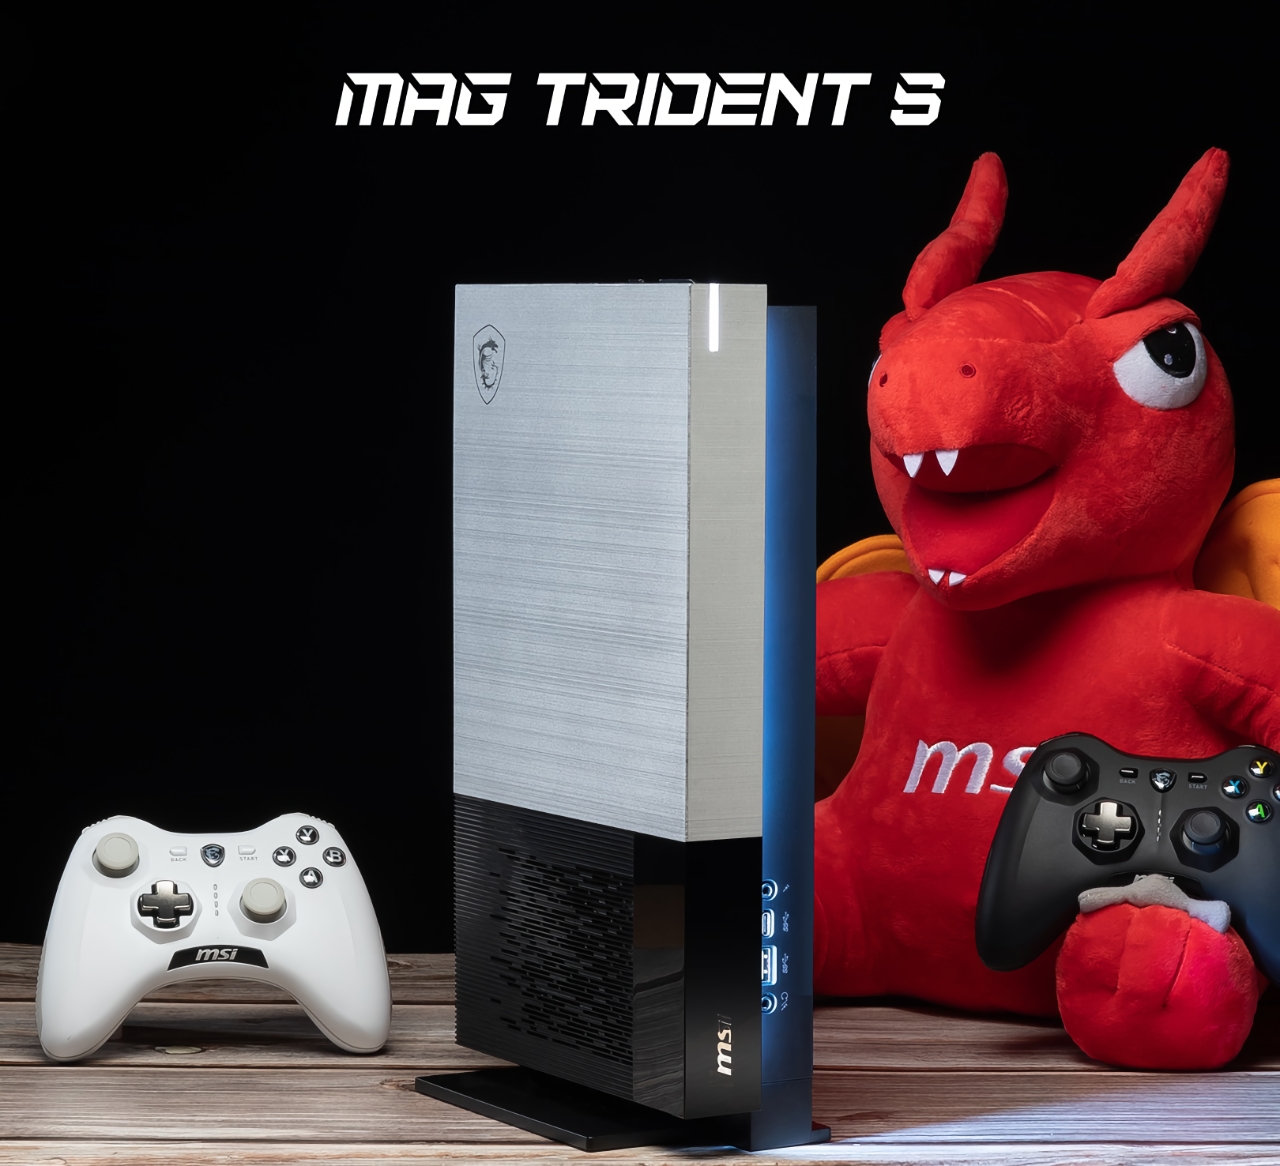 Unexpectedly: MSI will release the MAG Trident S game console with an AMD Ryzen 7 5700G processor